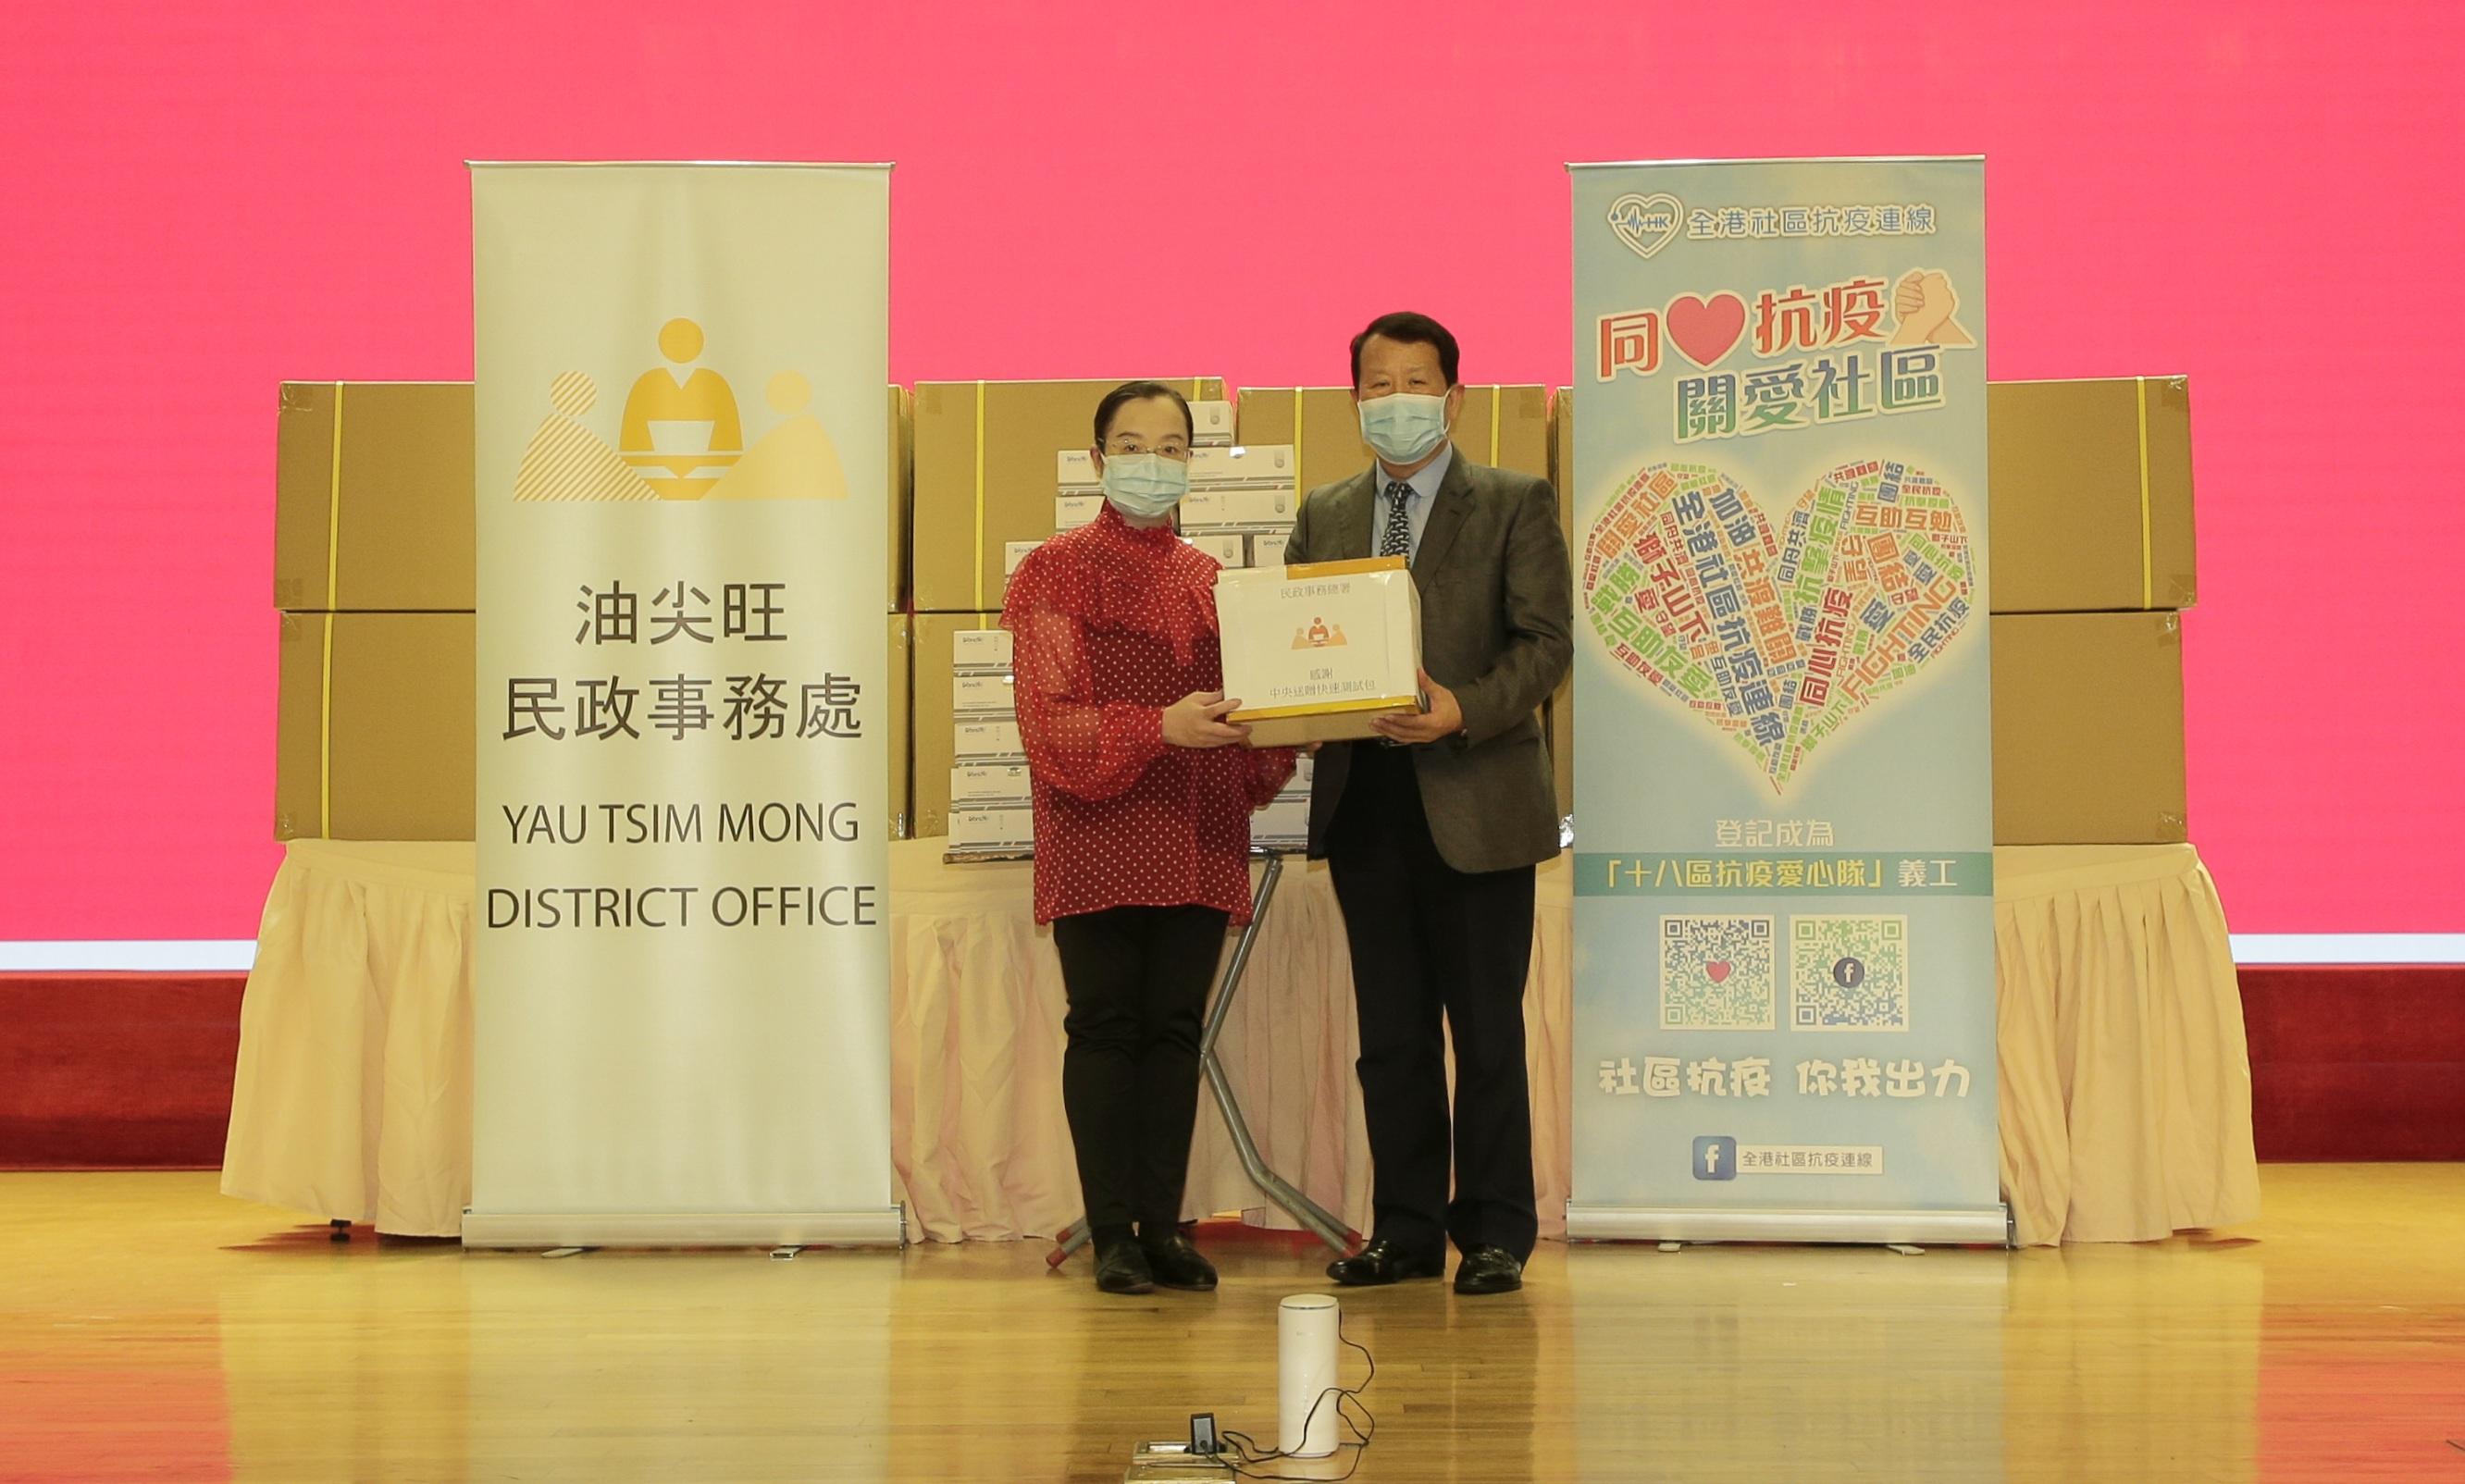 The Acting Director of Home Affairs, Miss Vega Wong, handed more than ten thousand rapid test kits to the Head of Federation of Hong Kong Hubei Associations, Mr Tse Chun-ming representing the event organisers of a vaccination event, for distribution to the participants on February 27.